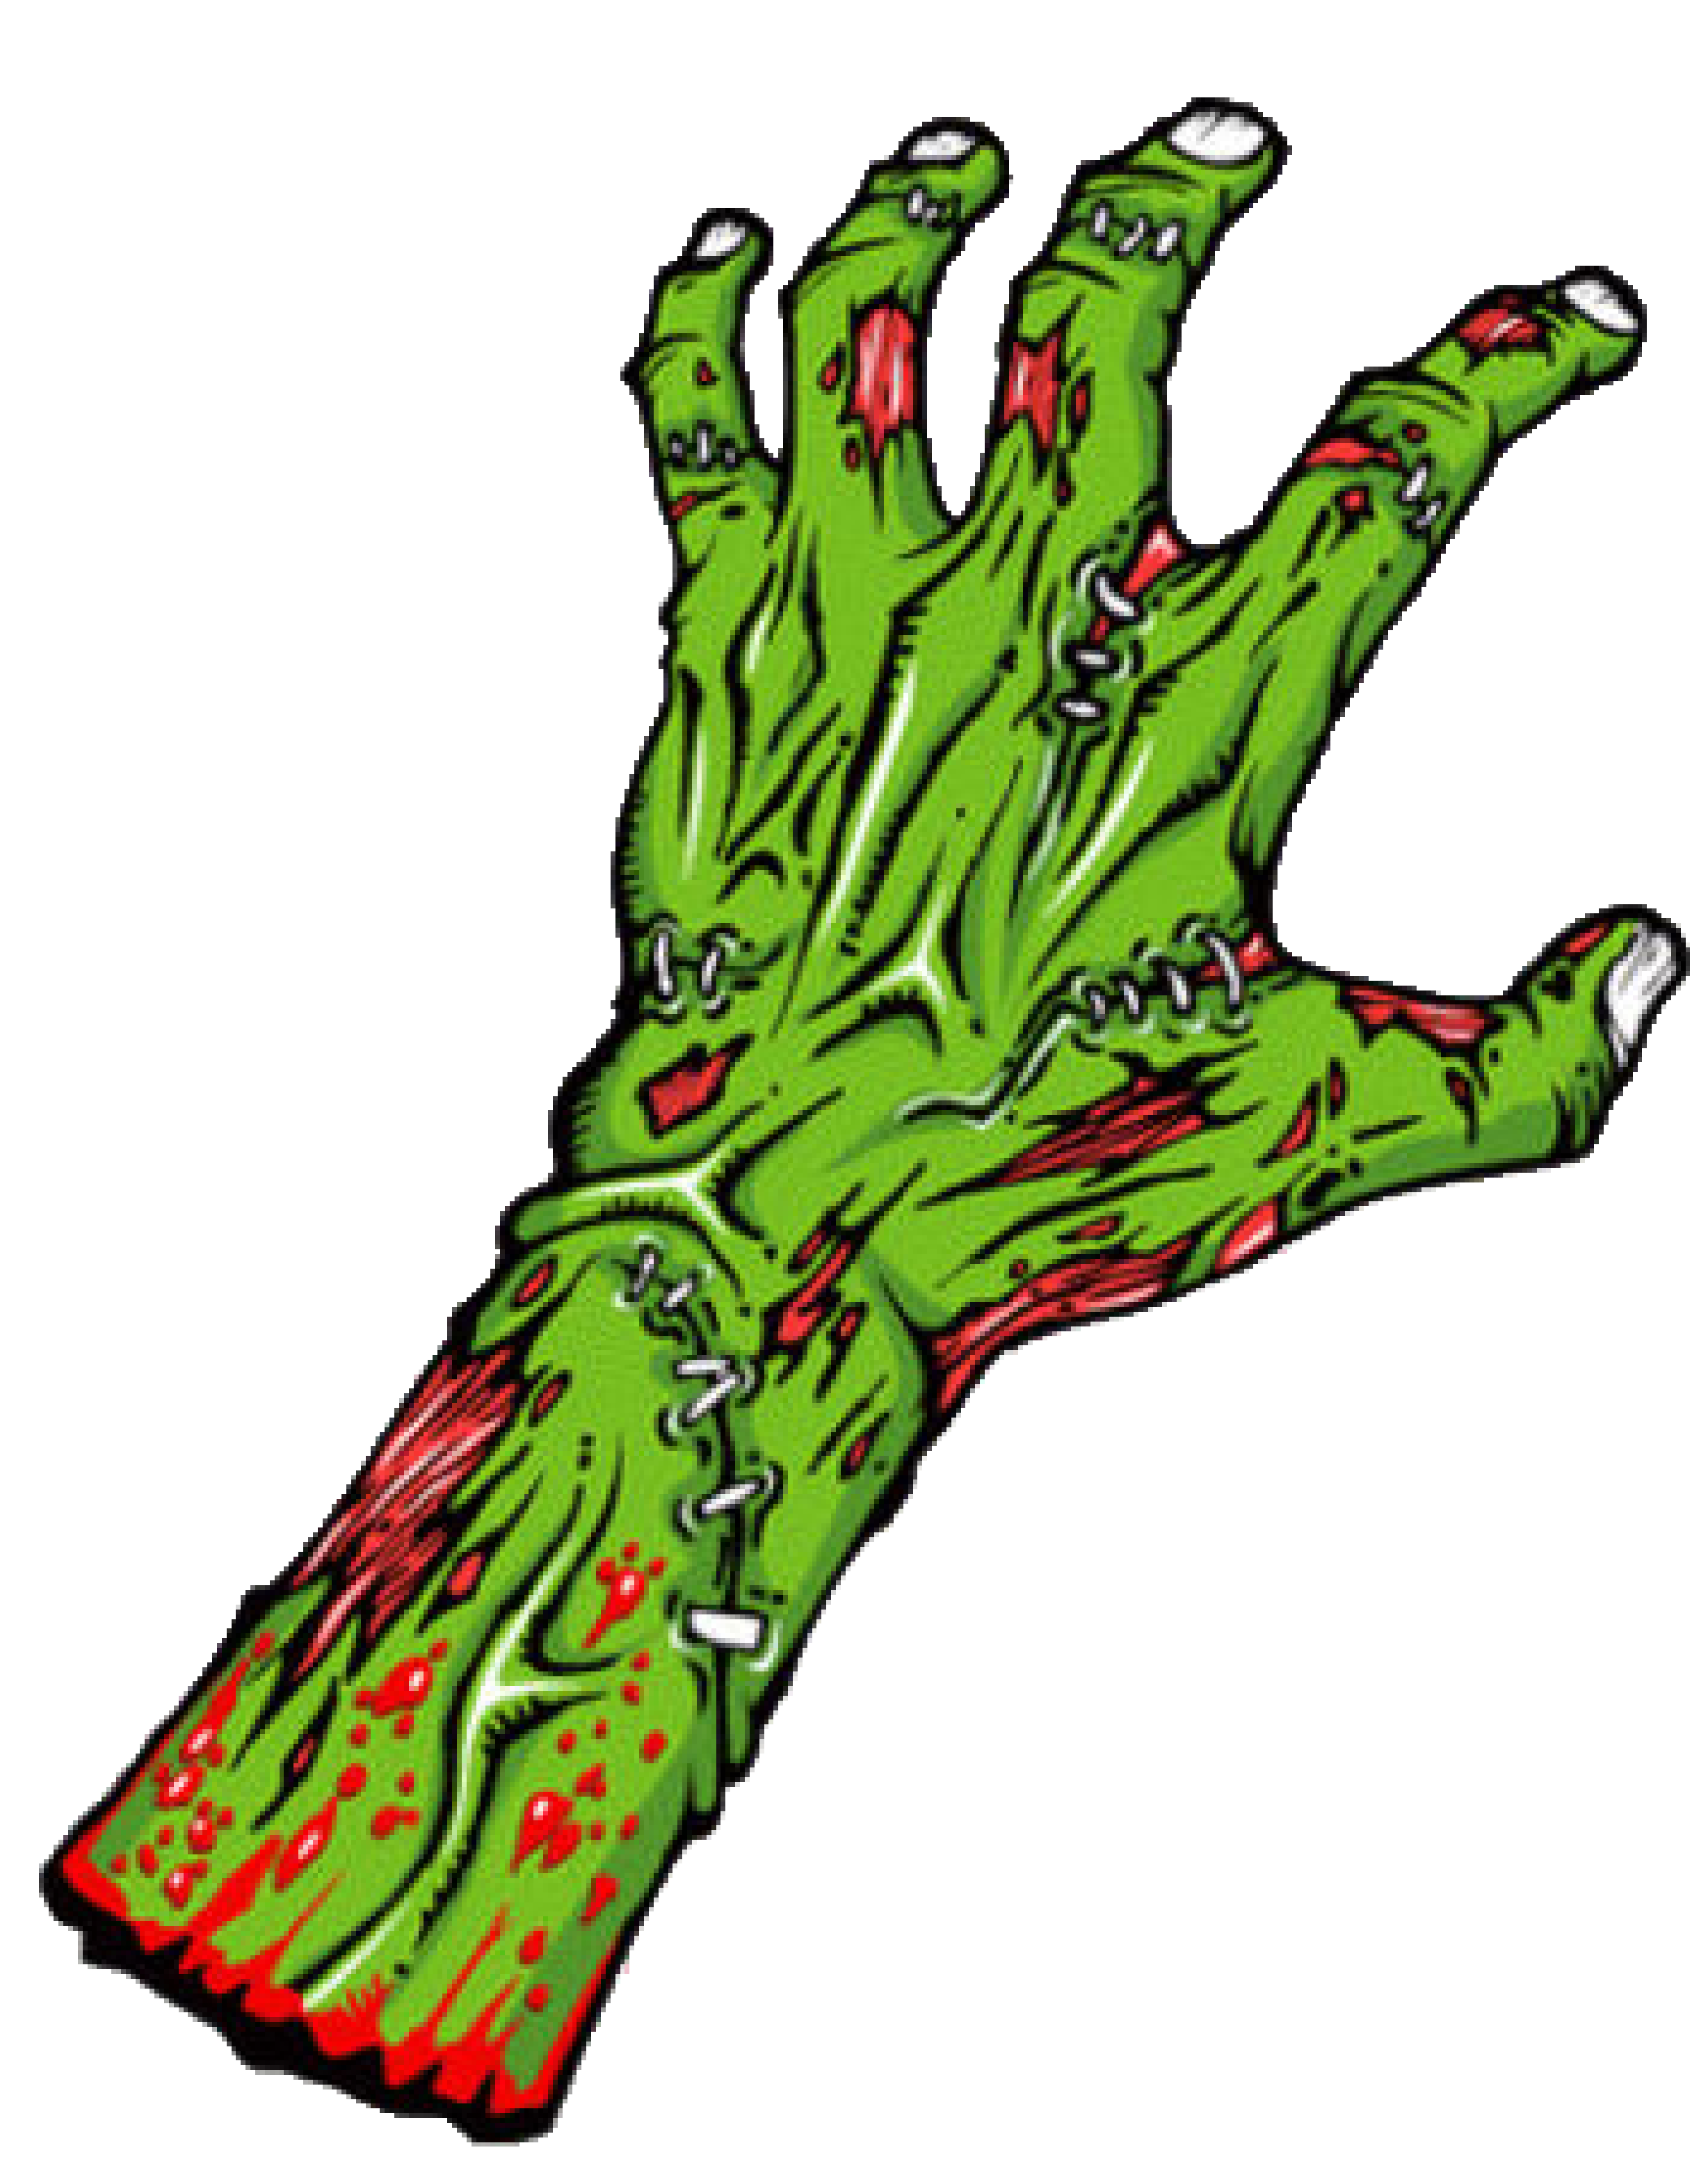 Zombie clipart hands. Clip art zombies the